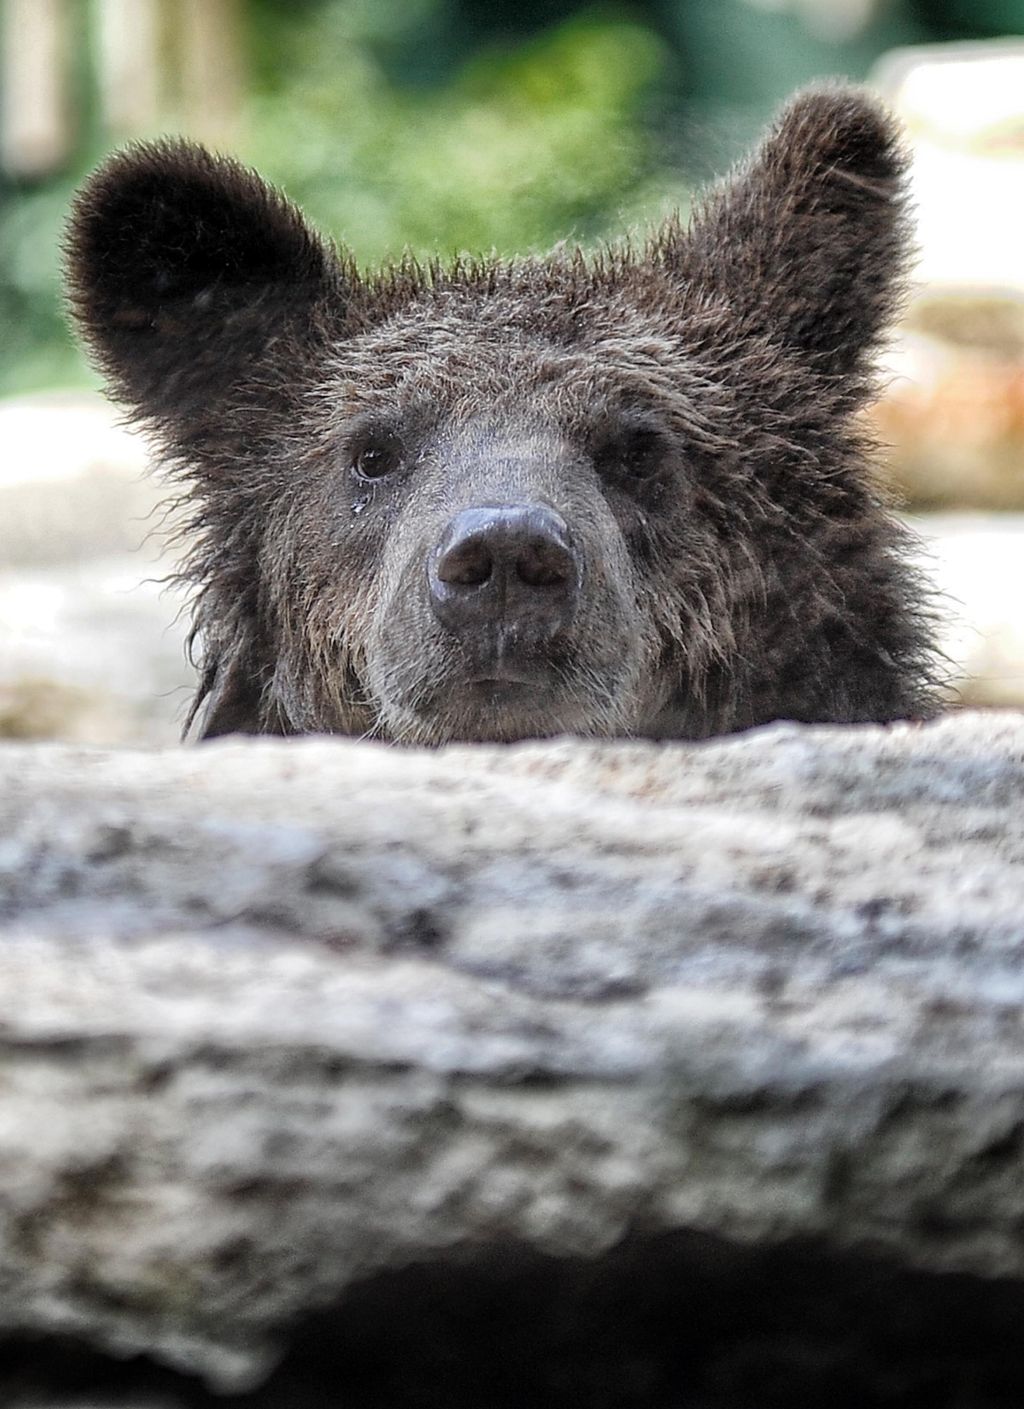 Three rescued brown Albanian bear cubs arrive at their new home at Bioparco di Roma Zoo